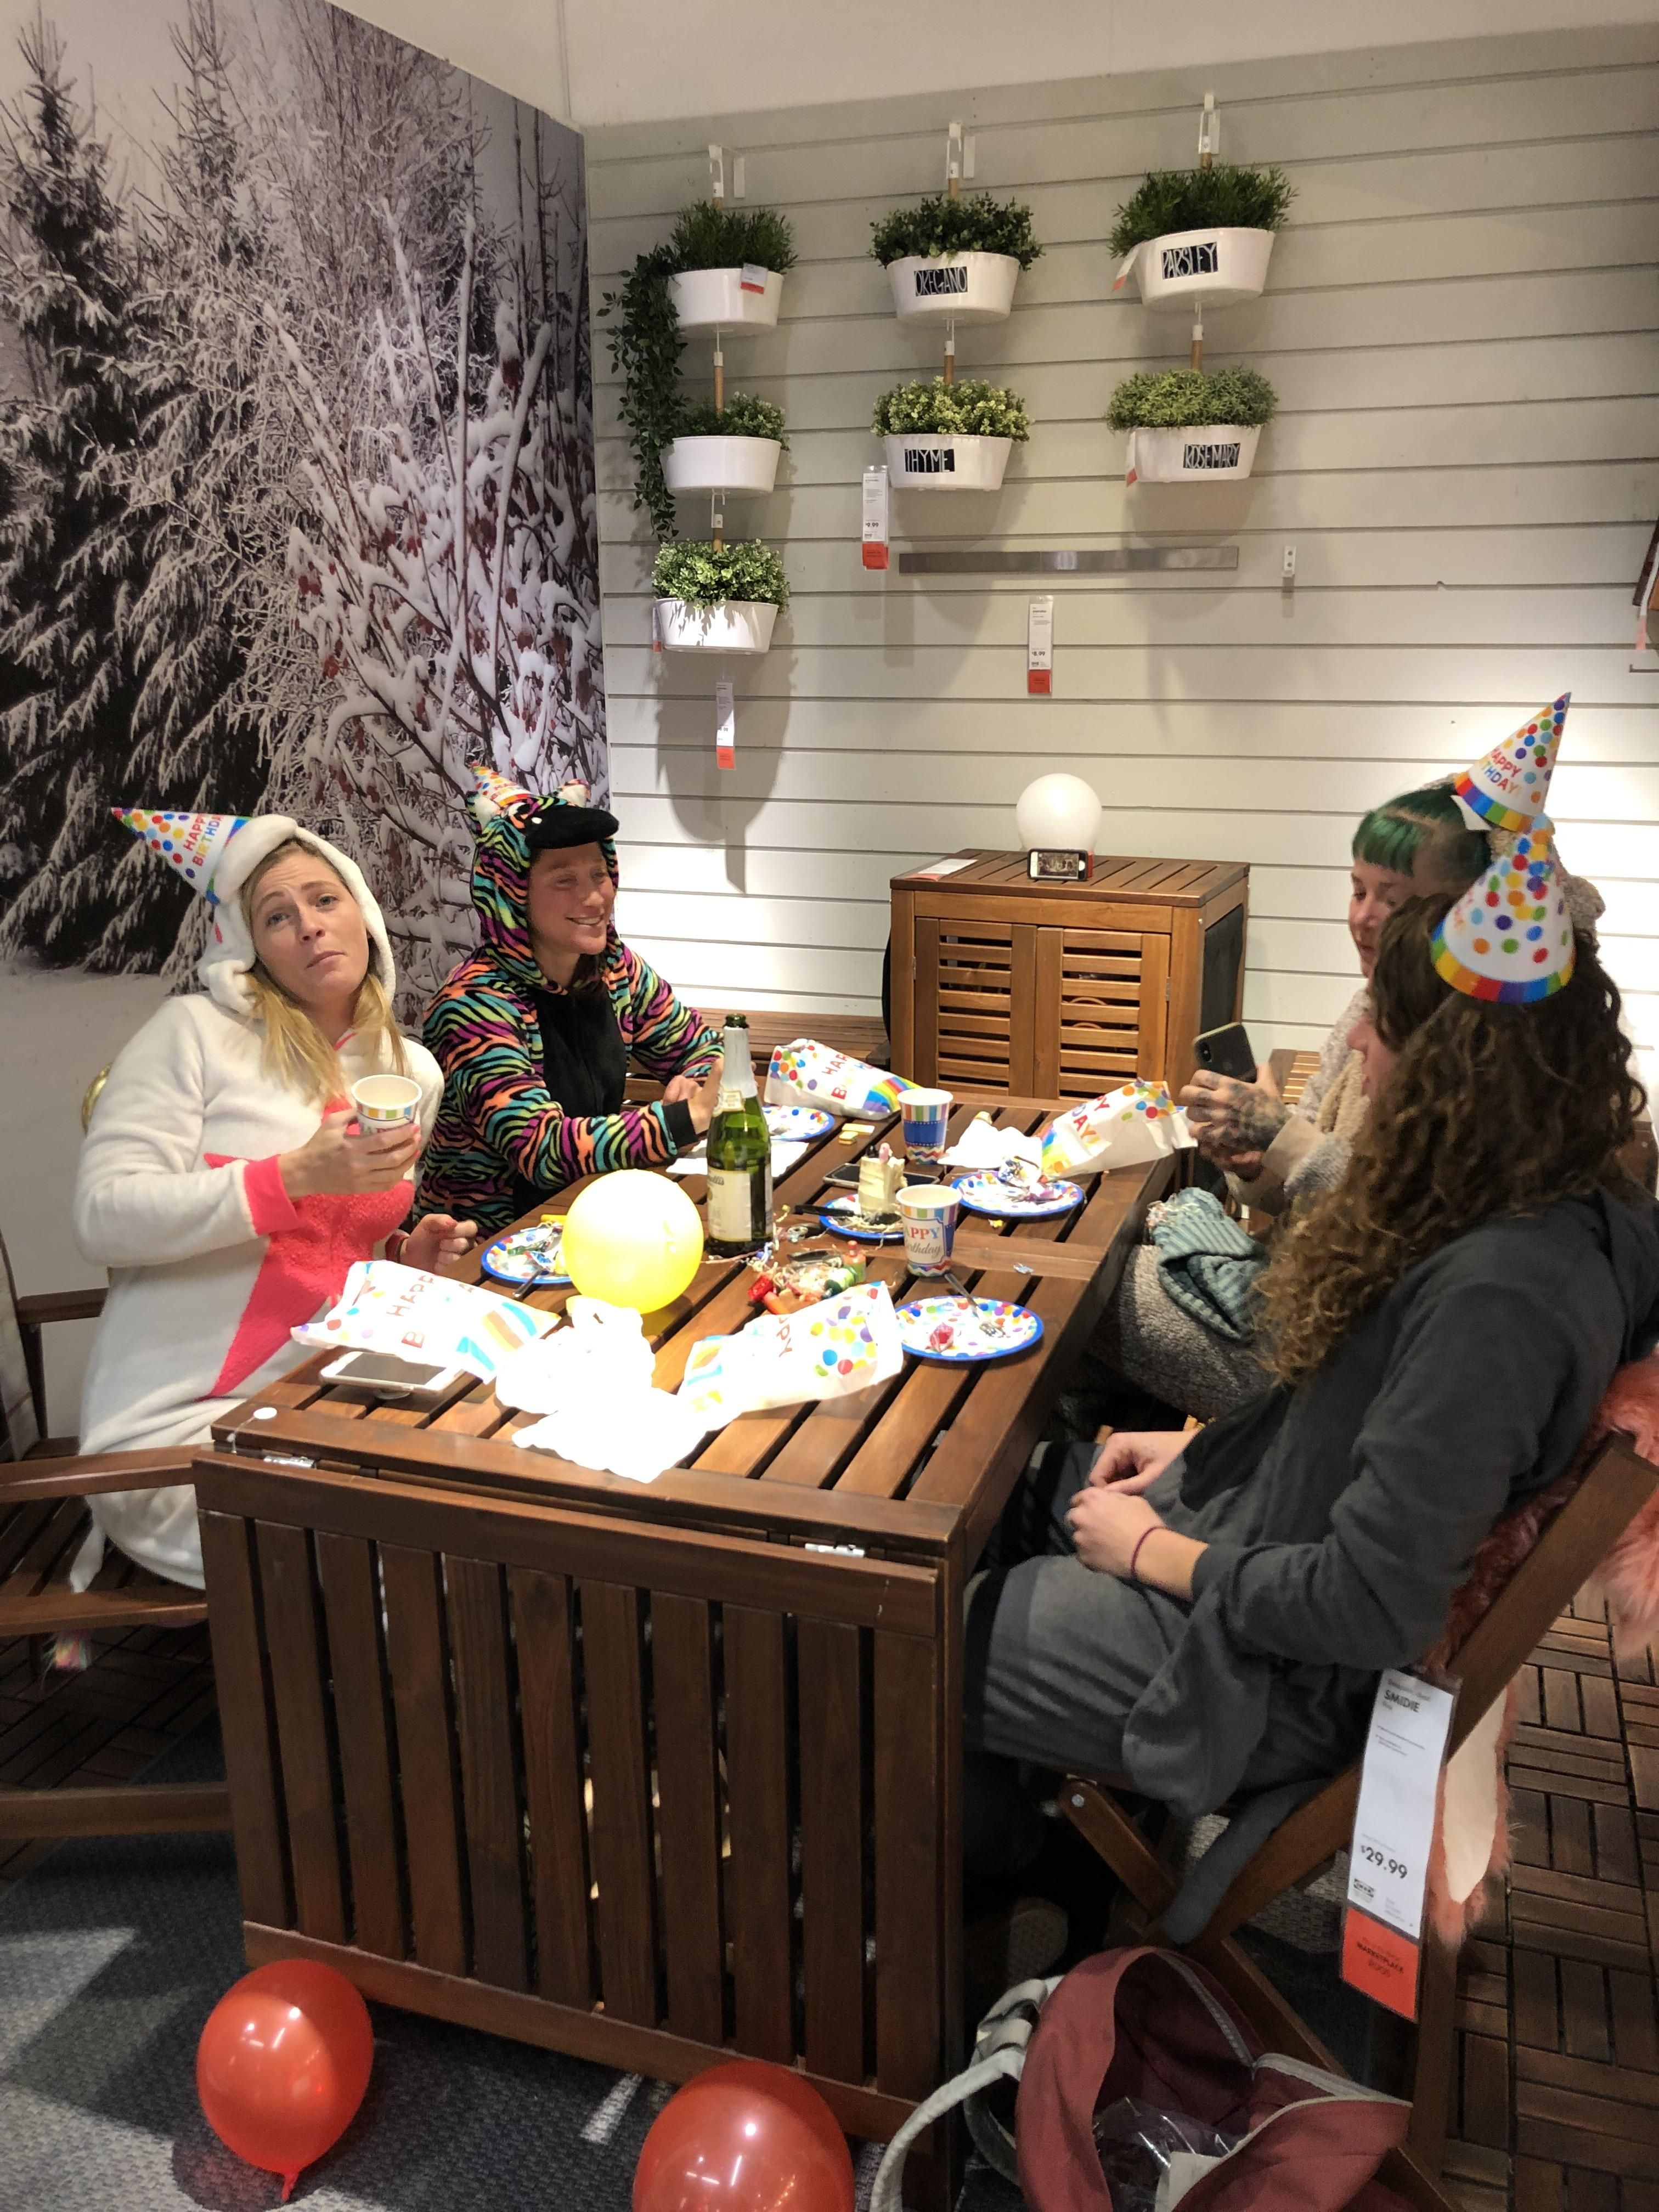 Ran into a group of people today celebrating a birthday in an IKEA display.